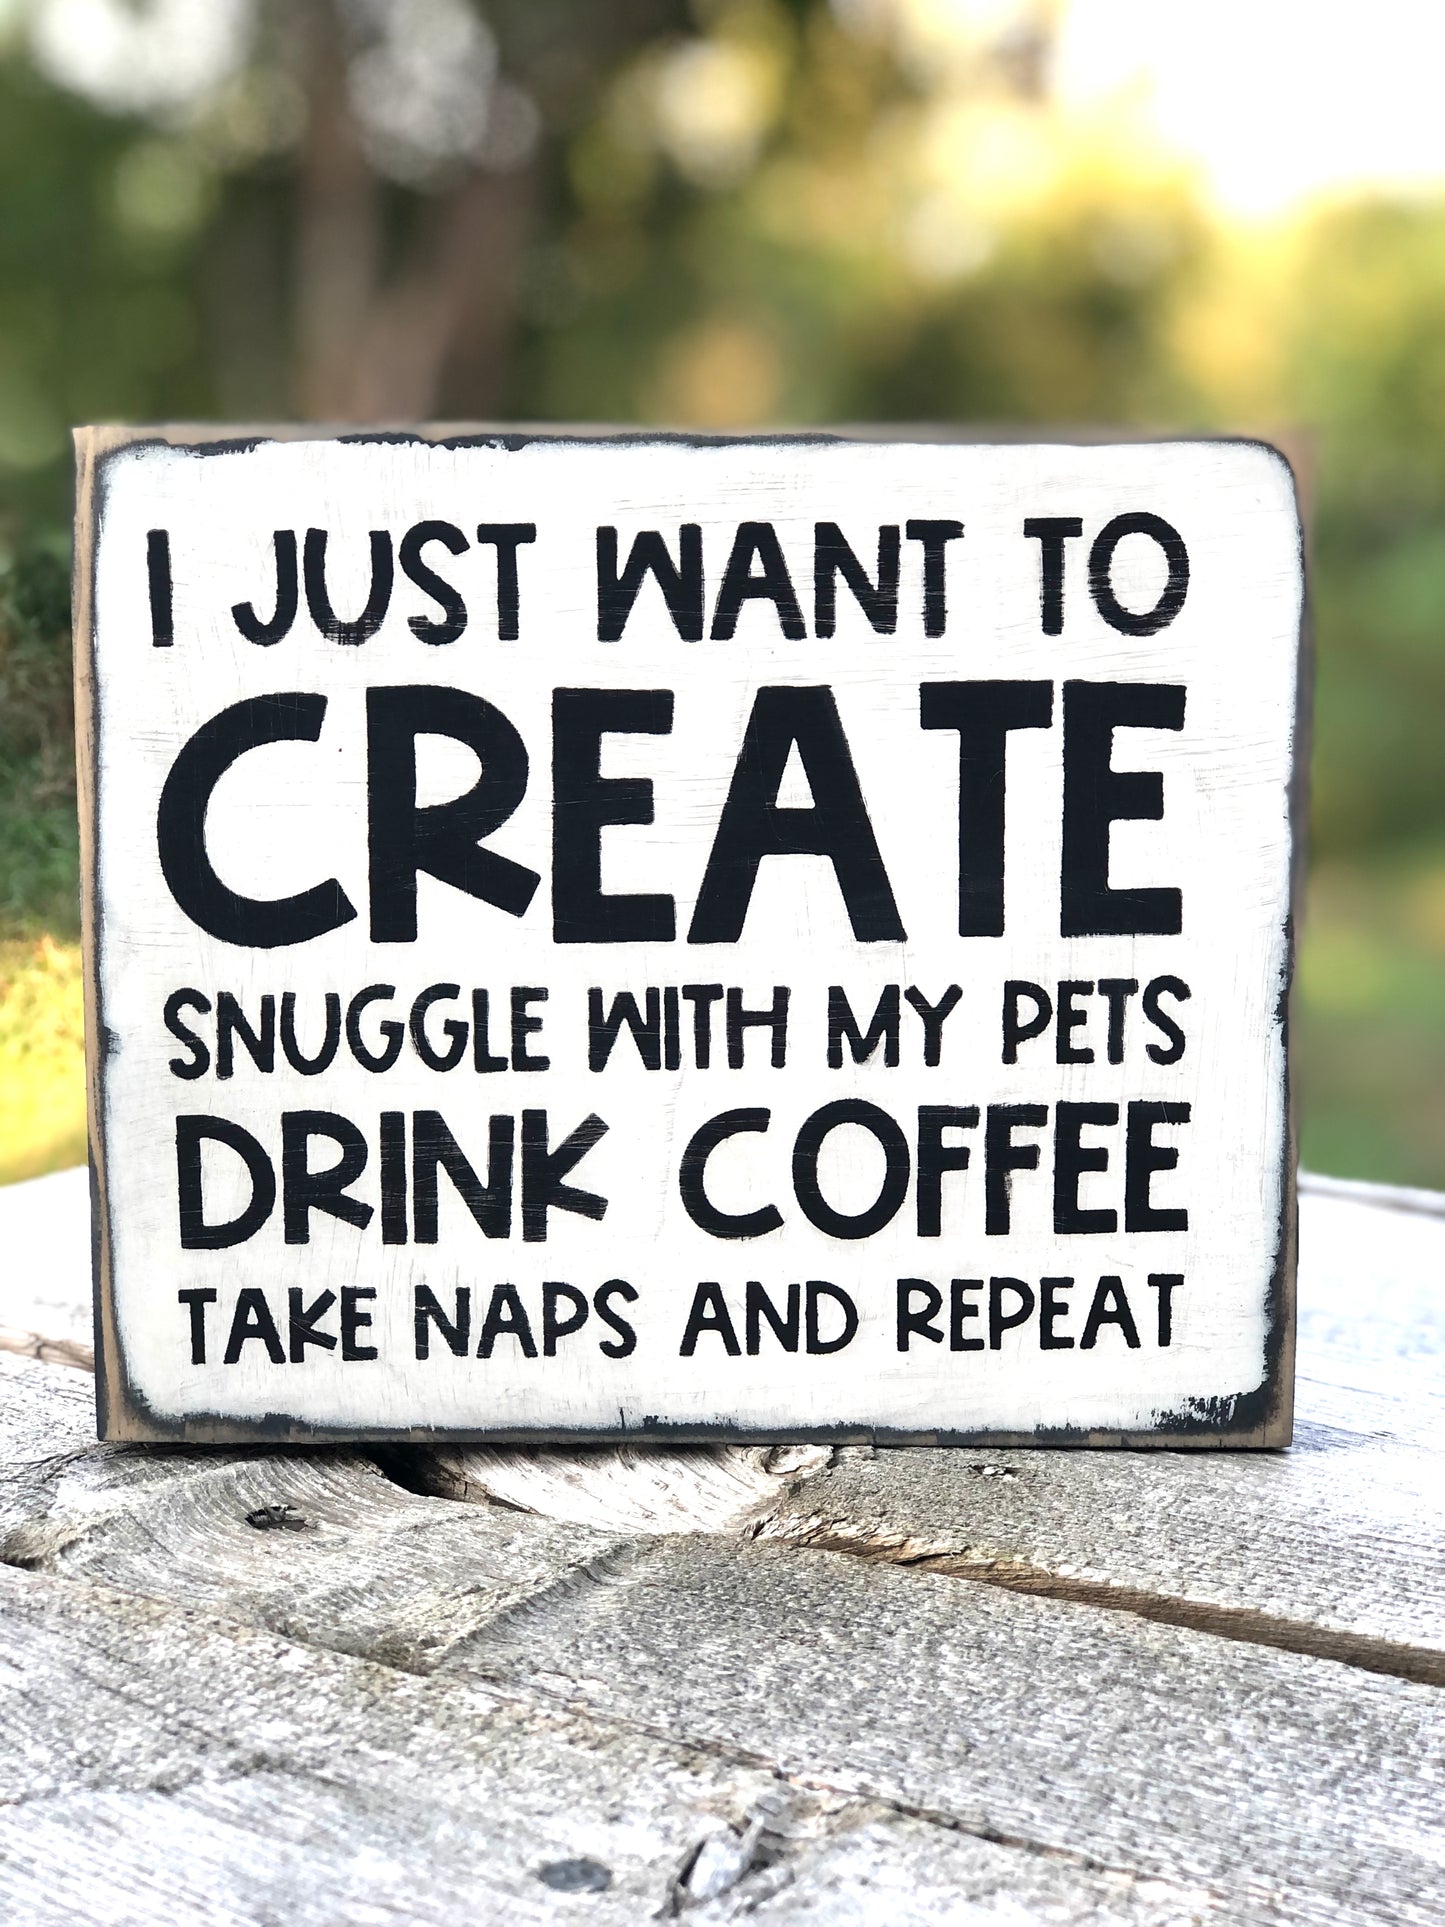 I JUST WANT TO CREATE, SNUGGLE WITH MY PETS, DRINK COFFEE, TAKES NAPS AND REPEAT- WOOD SIGN